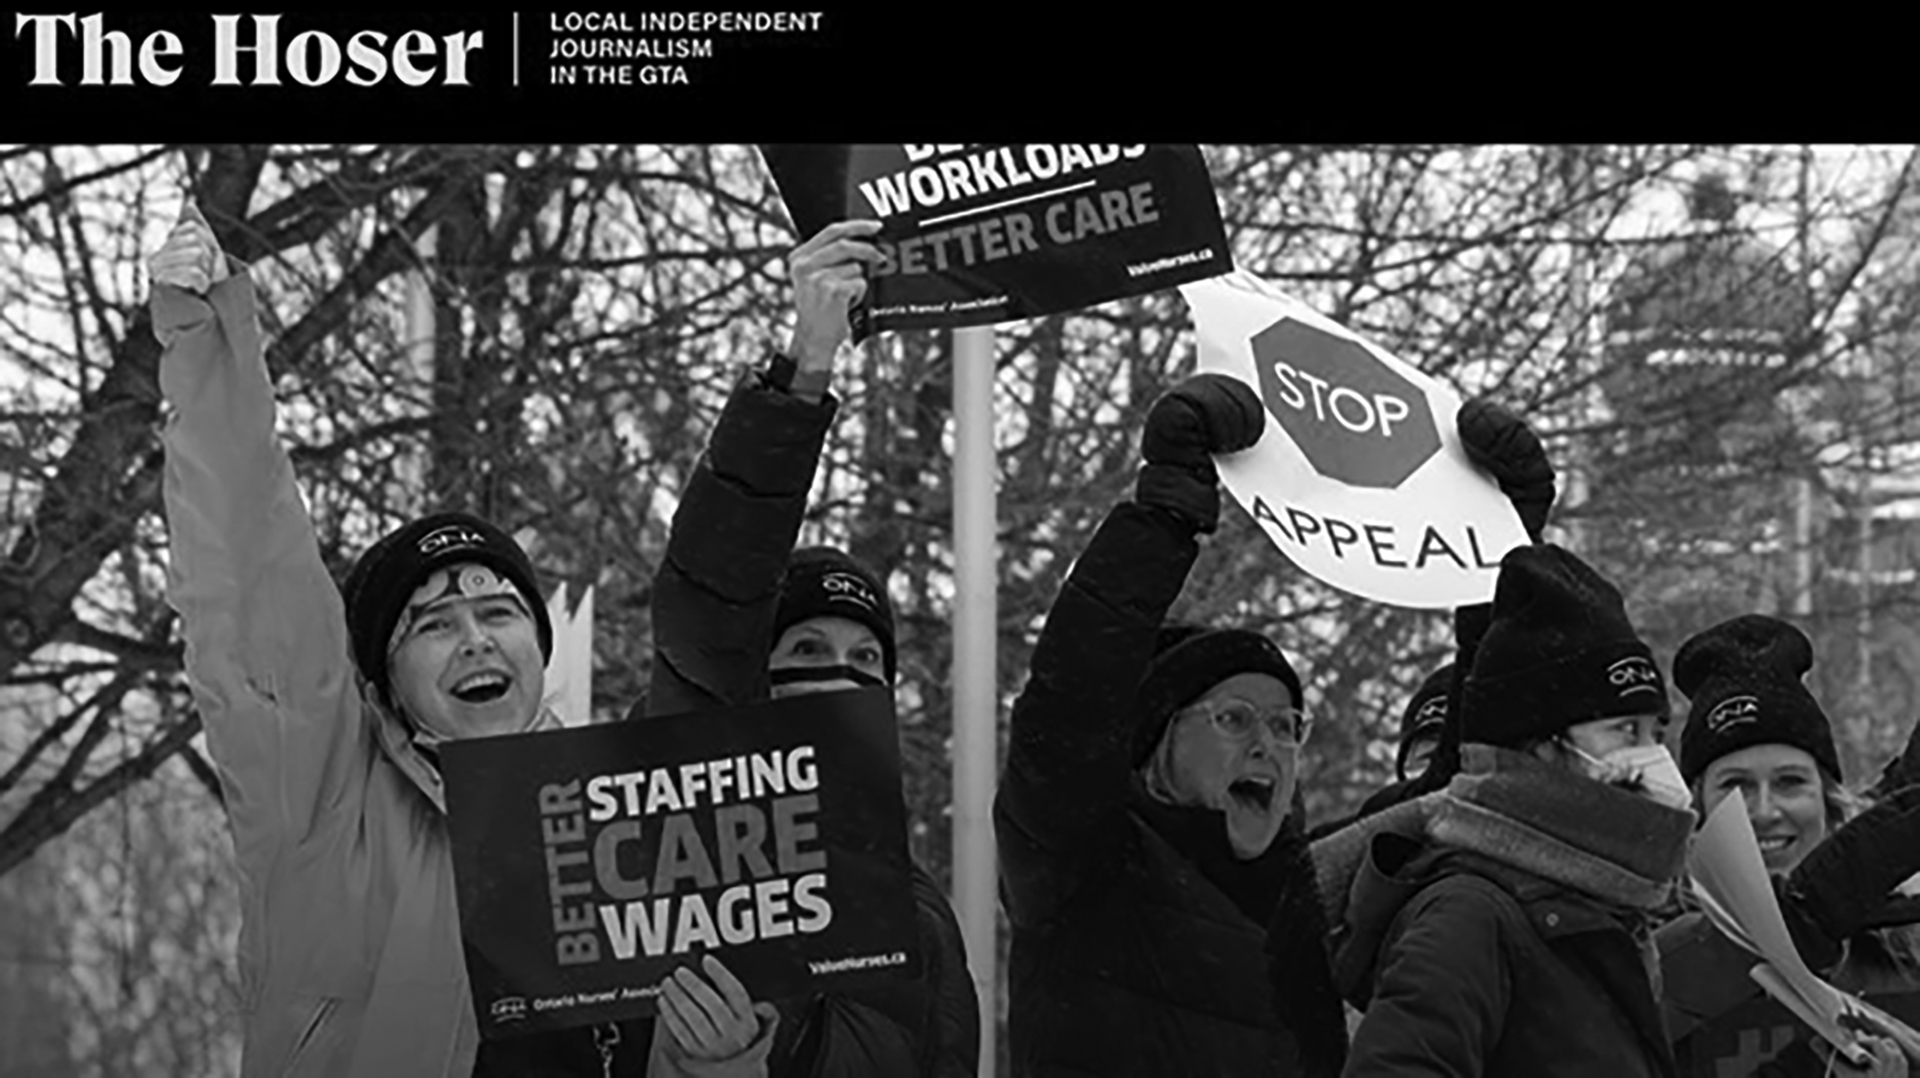 The Hoser website. Text in top right reads "The Hoser: Local independent journalism in the GTA." Photo of a handful of people, some holding signs reading "Better staffing care wages" and "stop appeal"